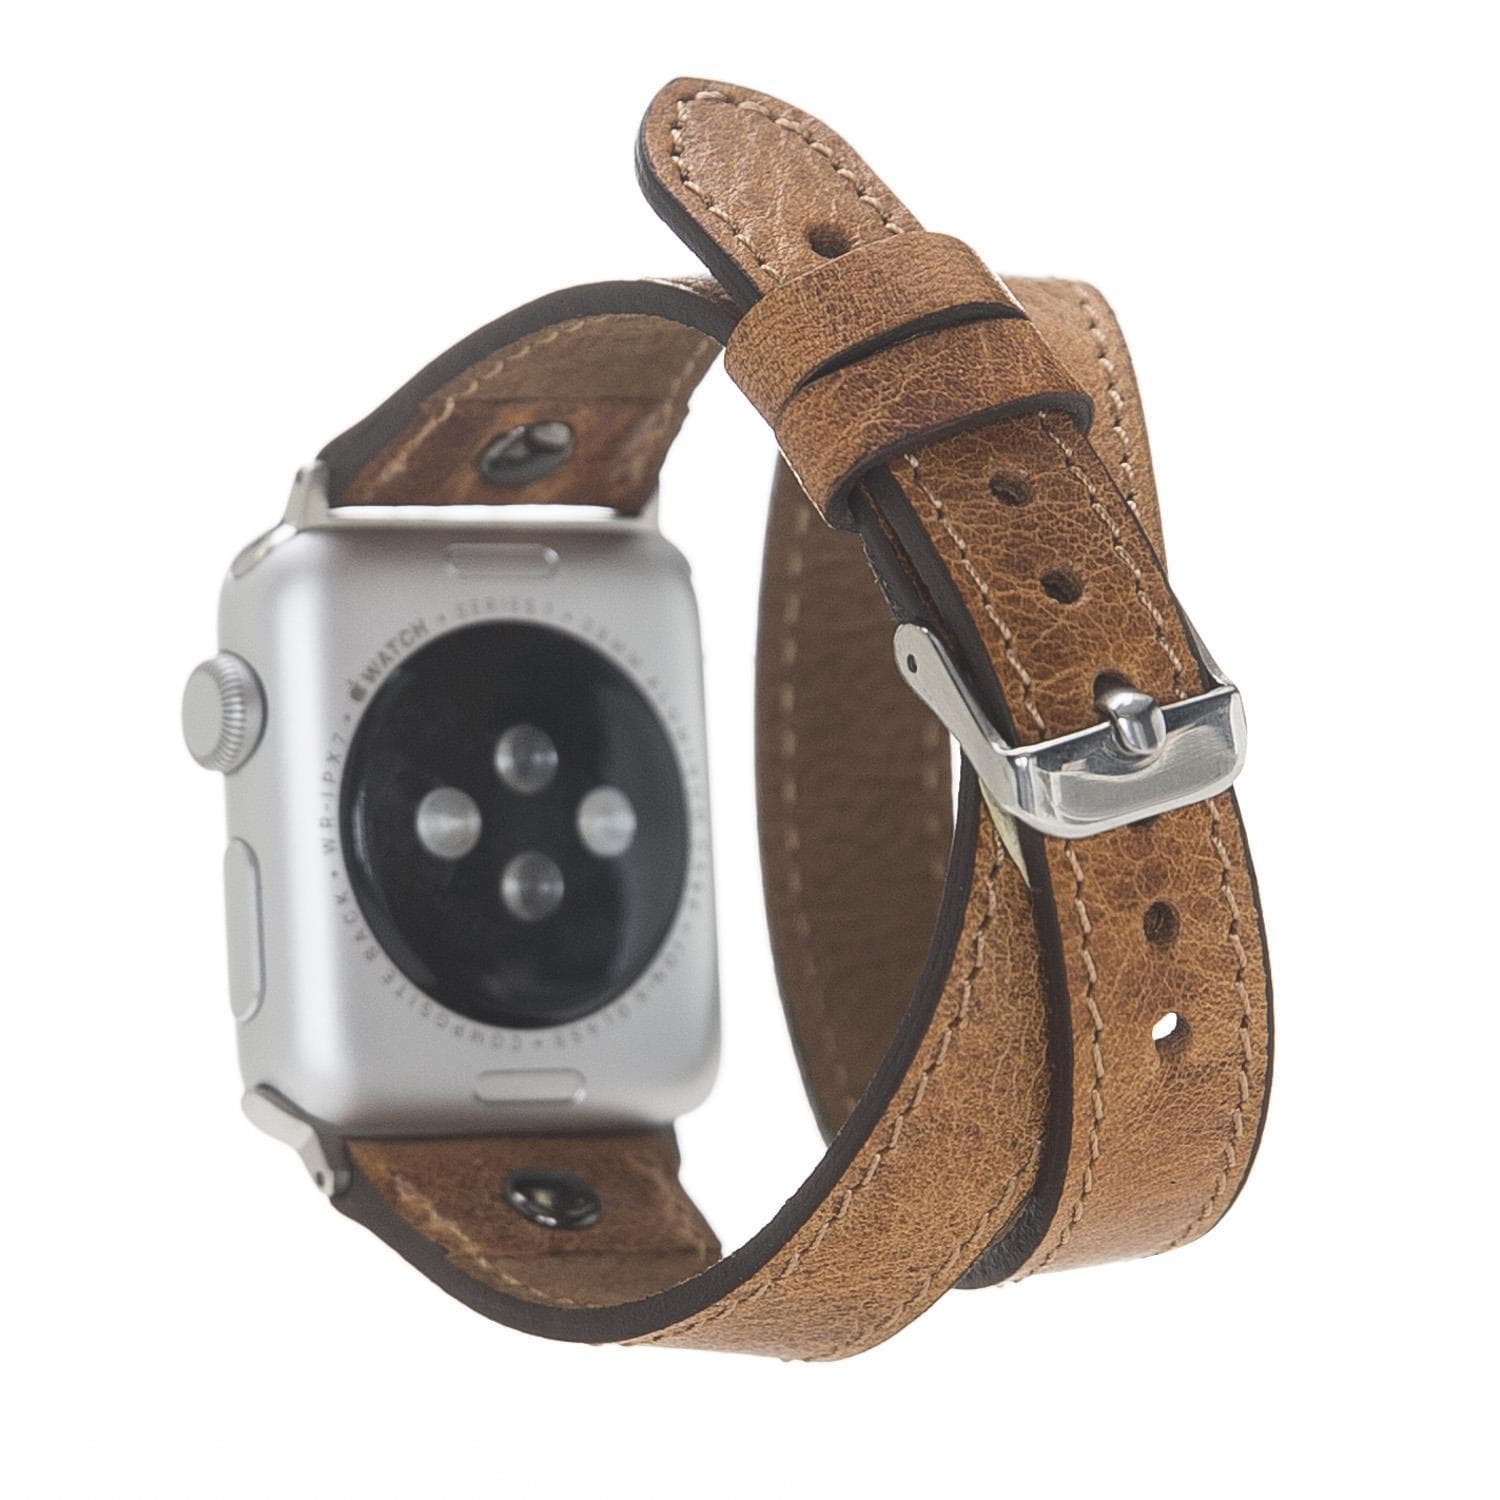 B2B - Leather Apple Watch Bands - DTS Double Tour Slim Hector Gold Trok Style VERGİTAL TABA Bomonti